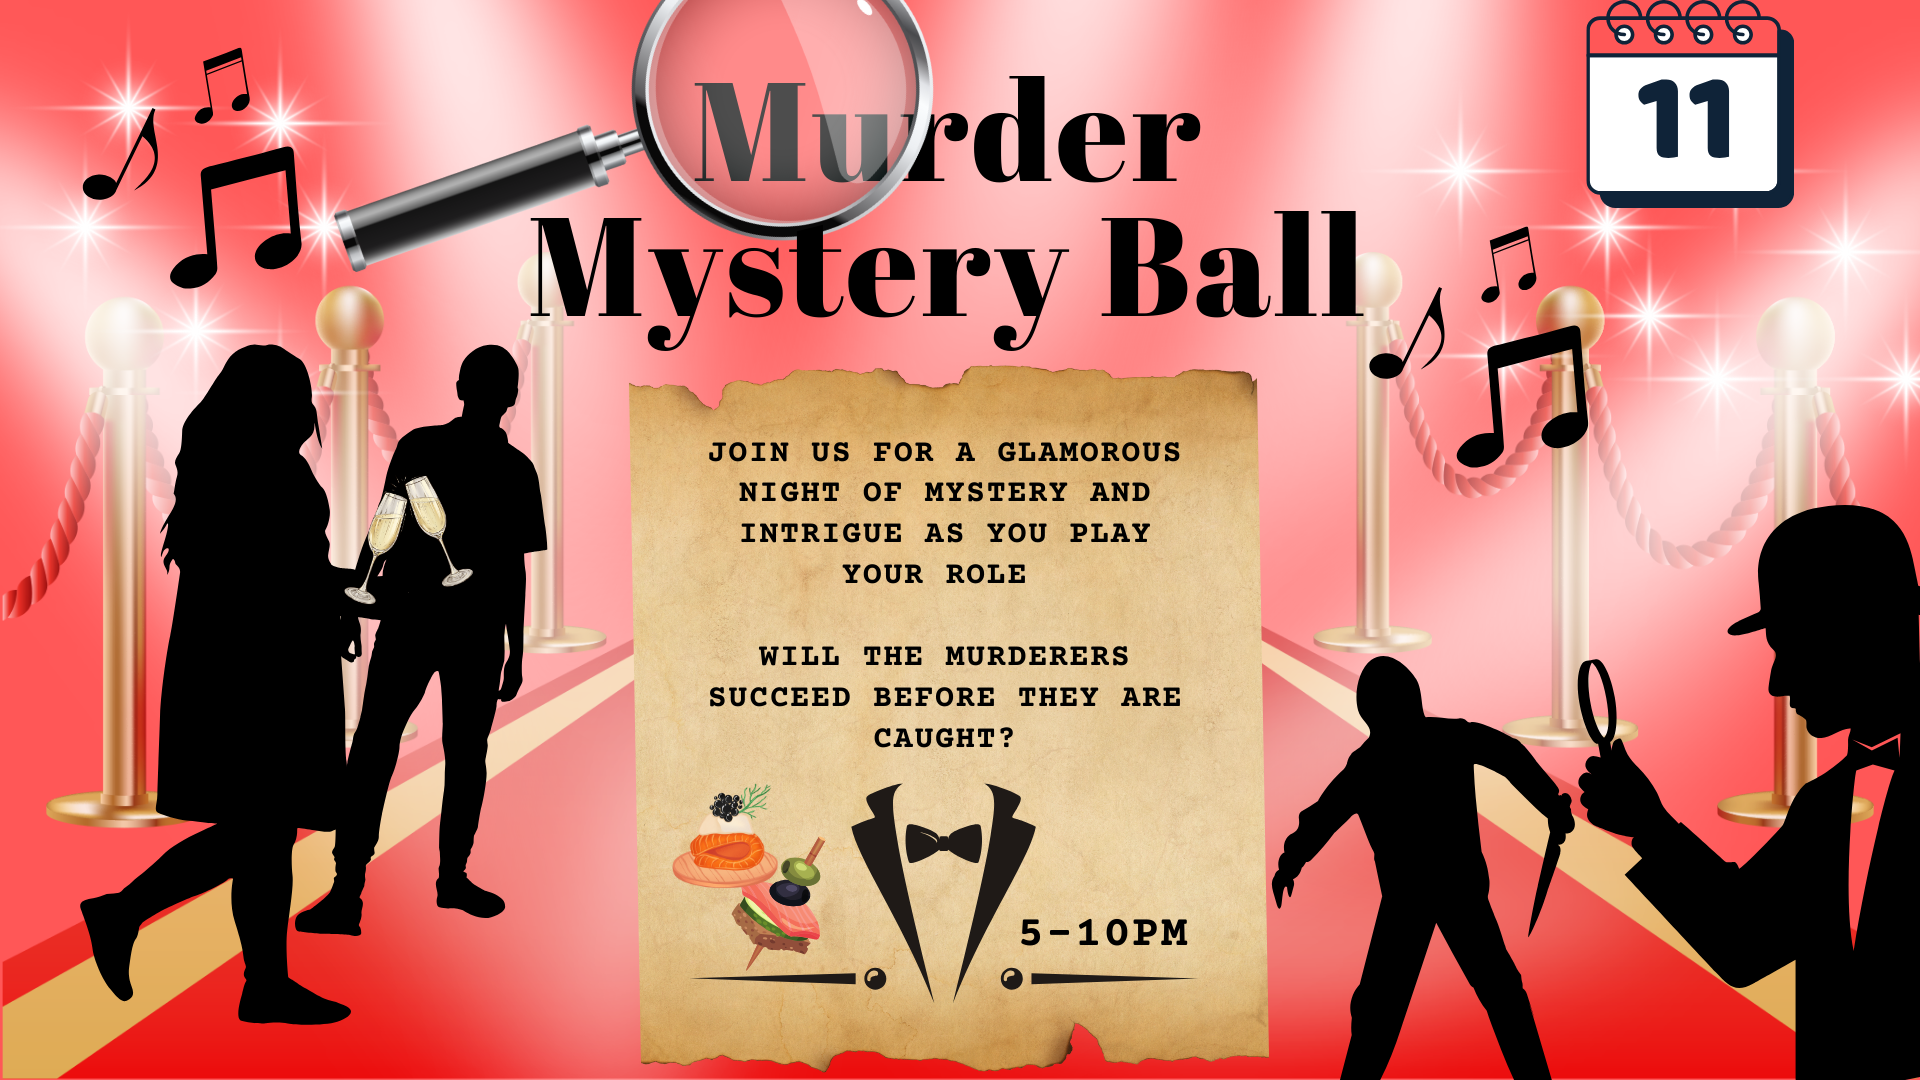 Photo of Flagship Event of THE HUB 175 - Inter-University Society called Murder Mystery Ball